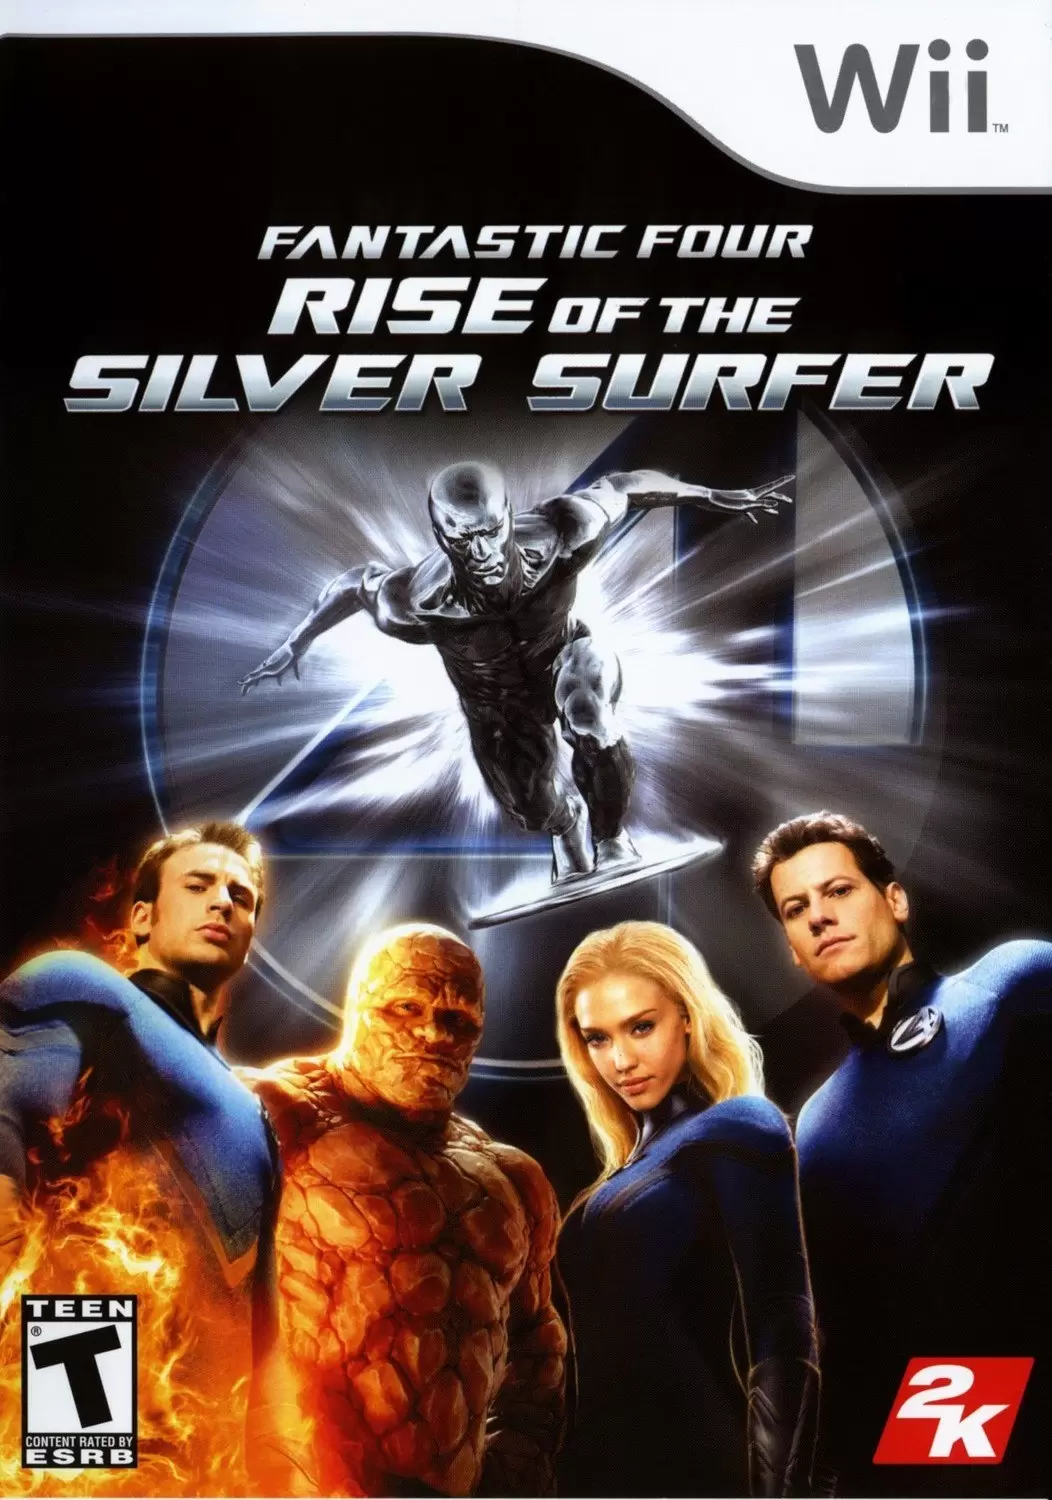 Nintendo Wii Games - Fantastic Four: Rise of the Silver Surfer